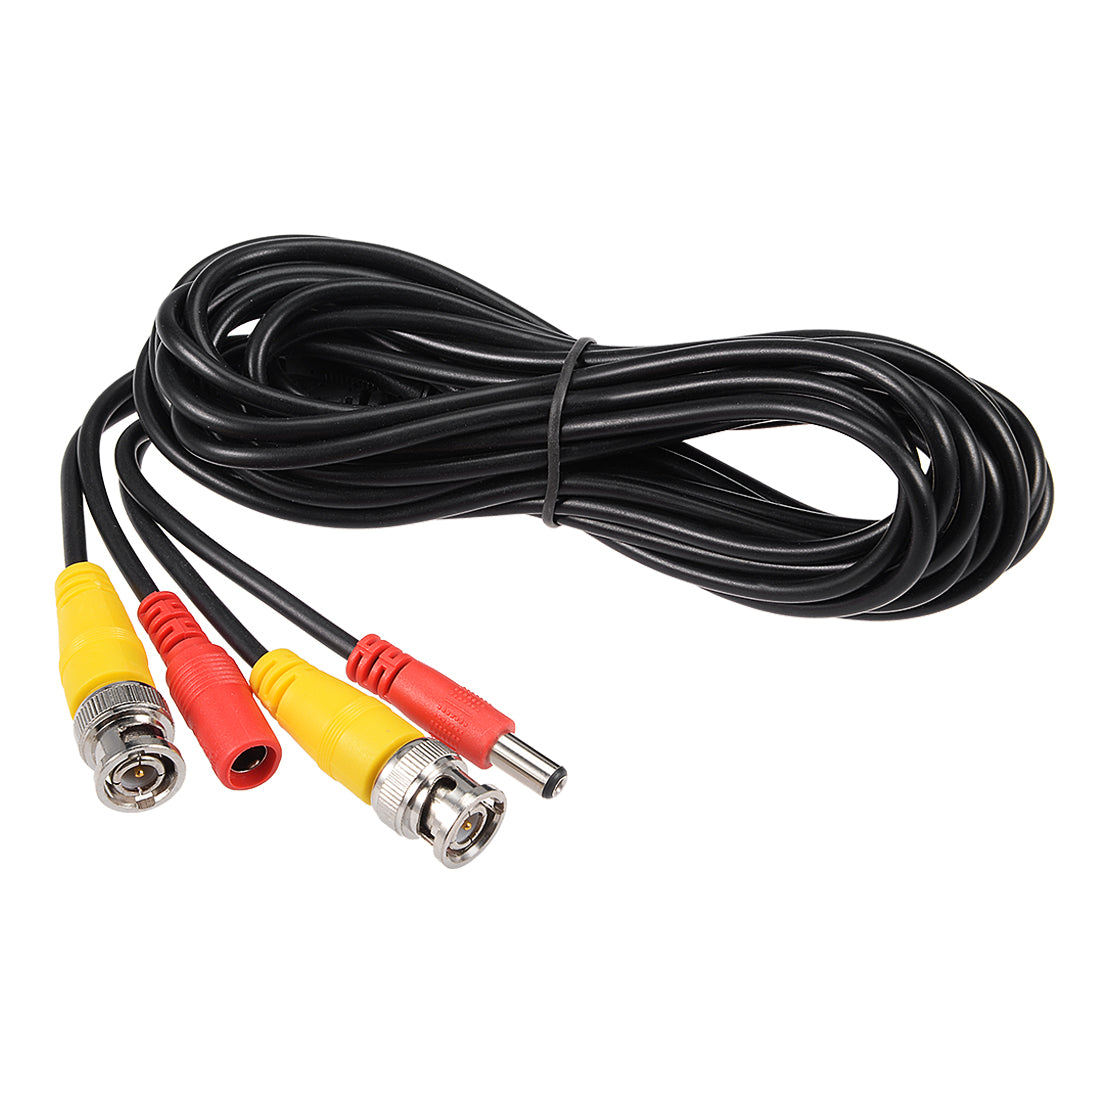 uxcell Uxcell 5M Black BNC-DC Video Power Cable Wire for Security Camera CCTV DVR Surveillance System Play